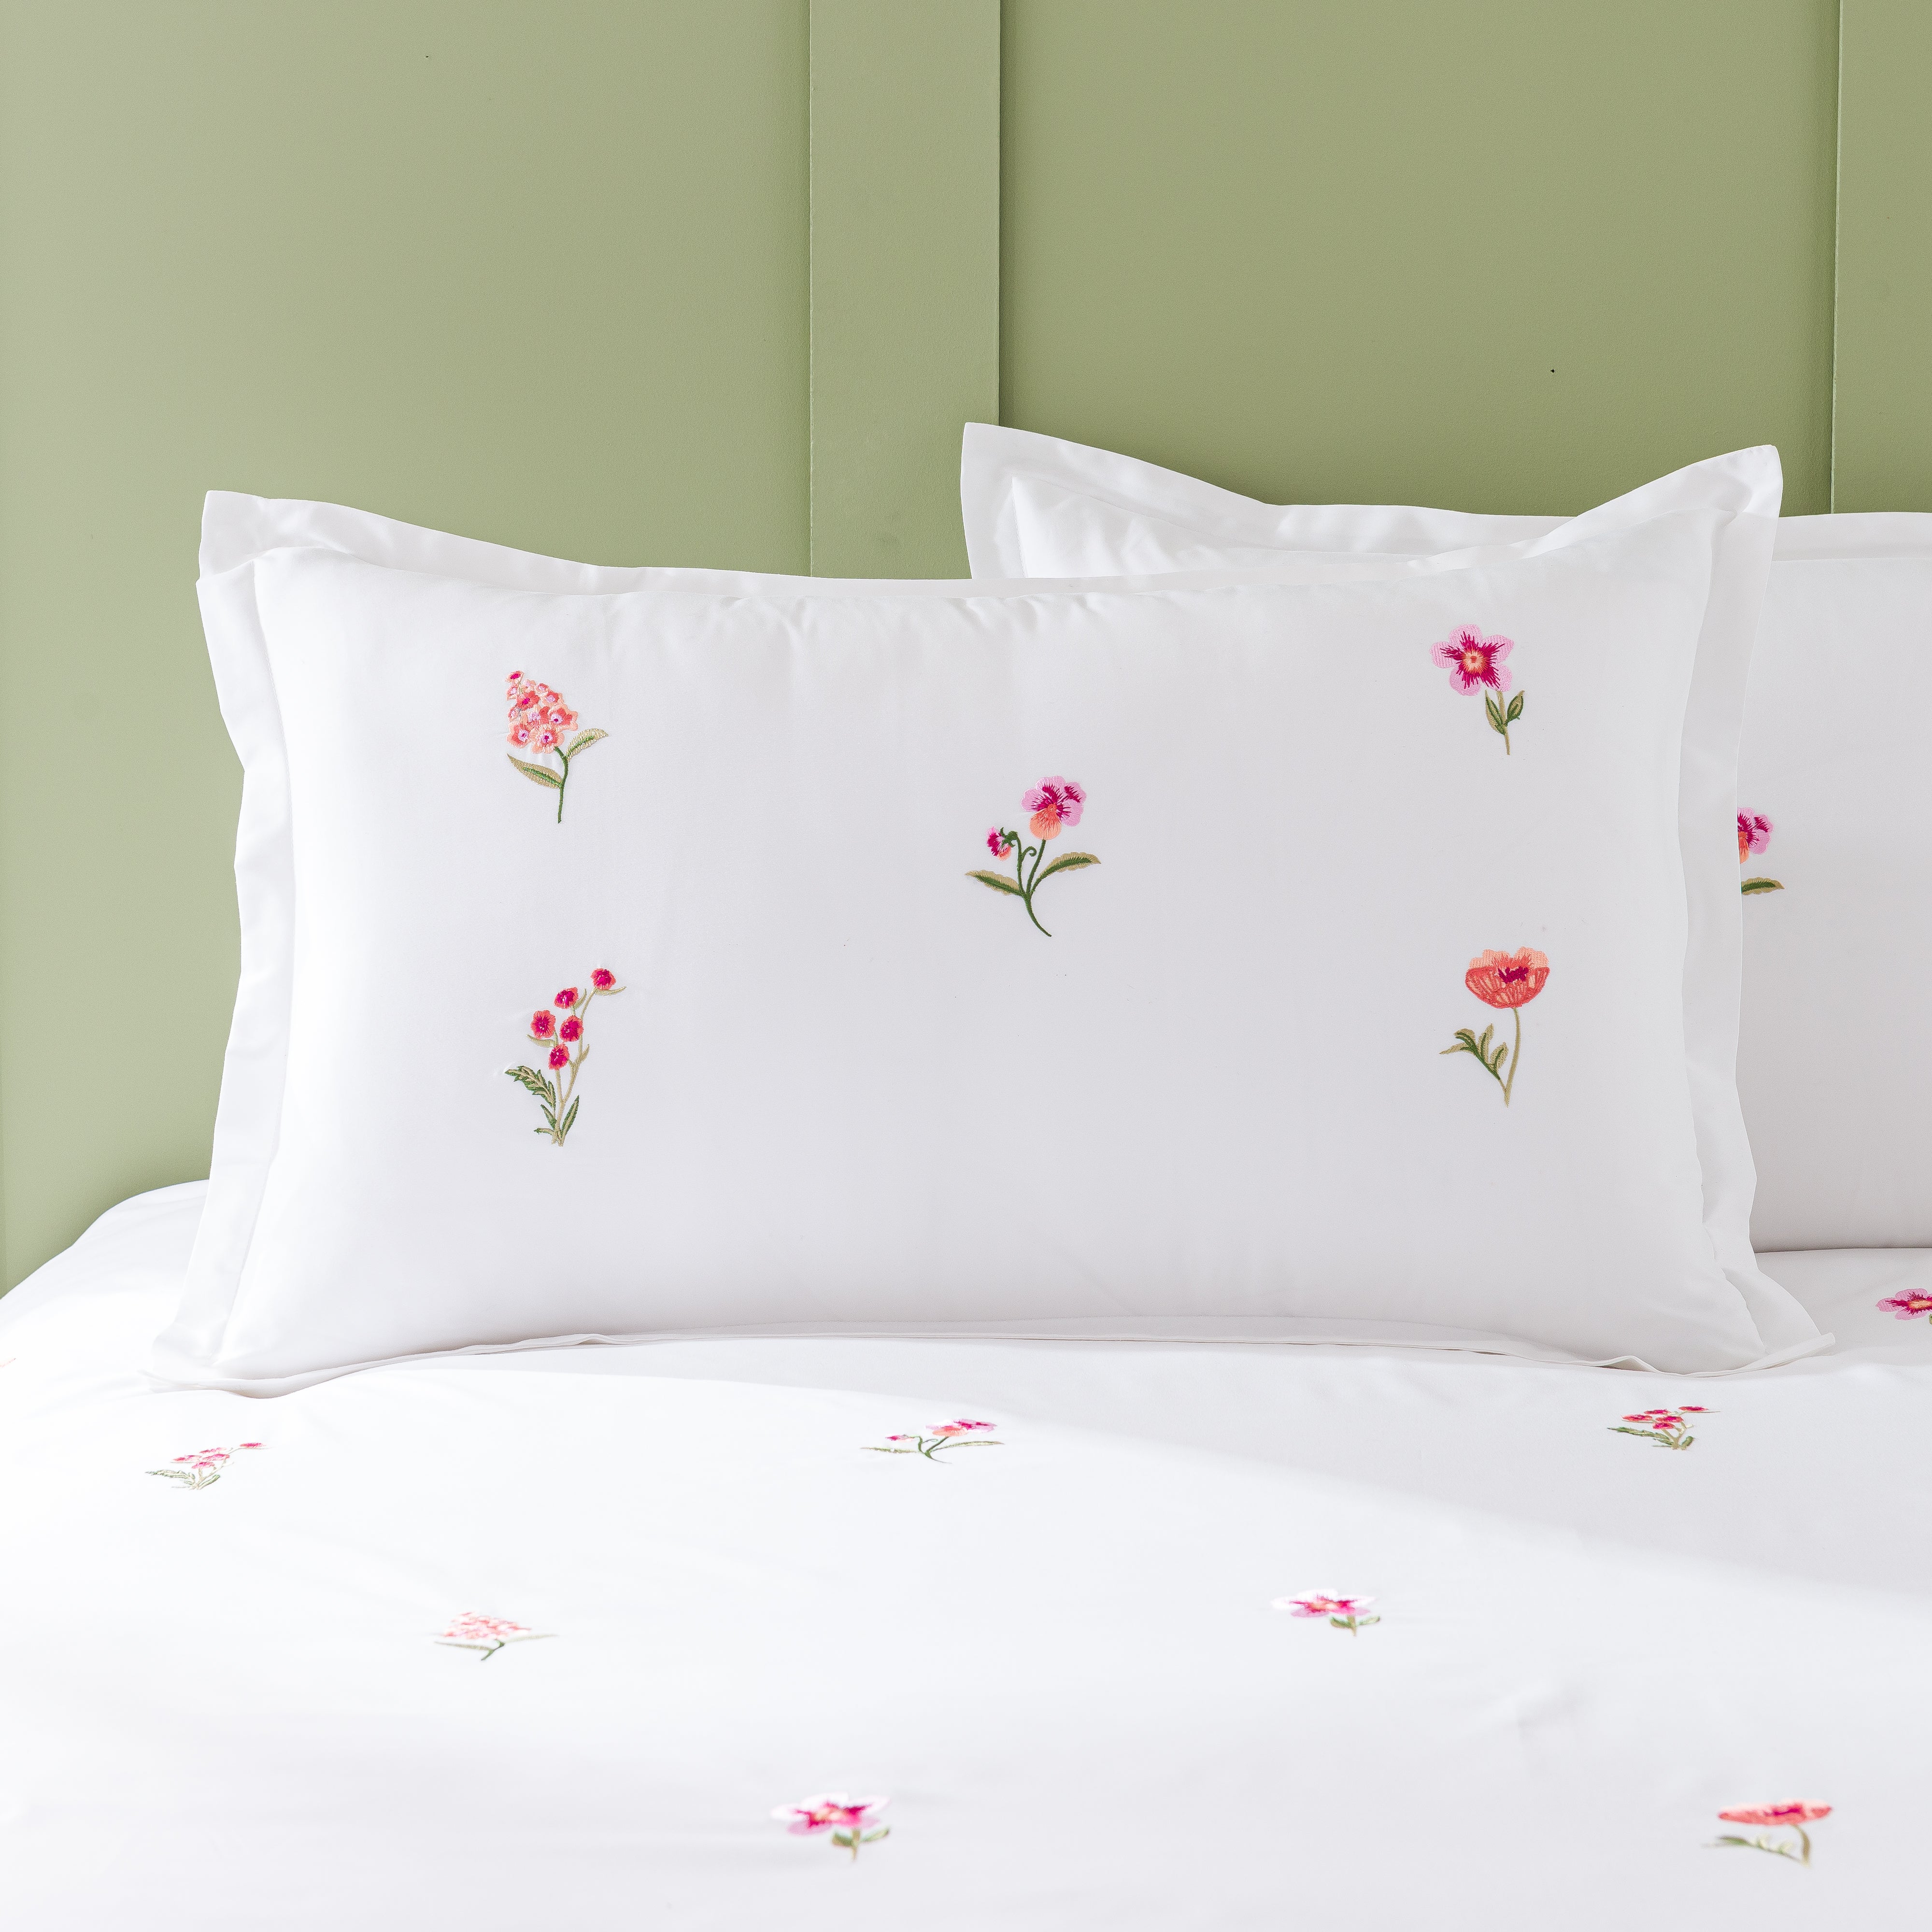 Rosetta Floral Embroidery Oxford Pillowcase Pink